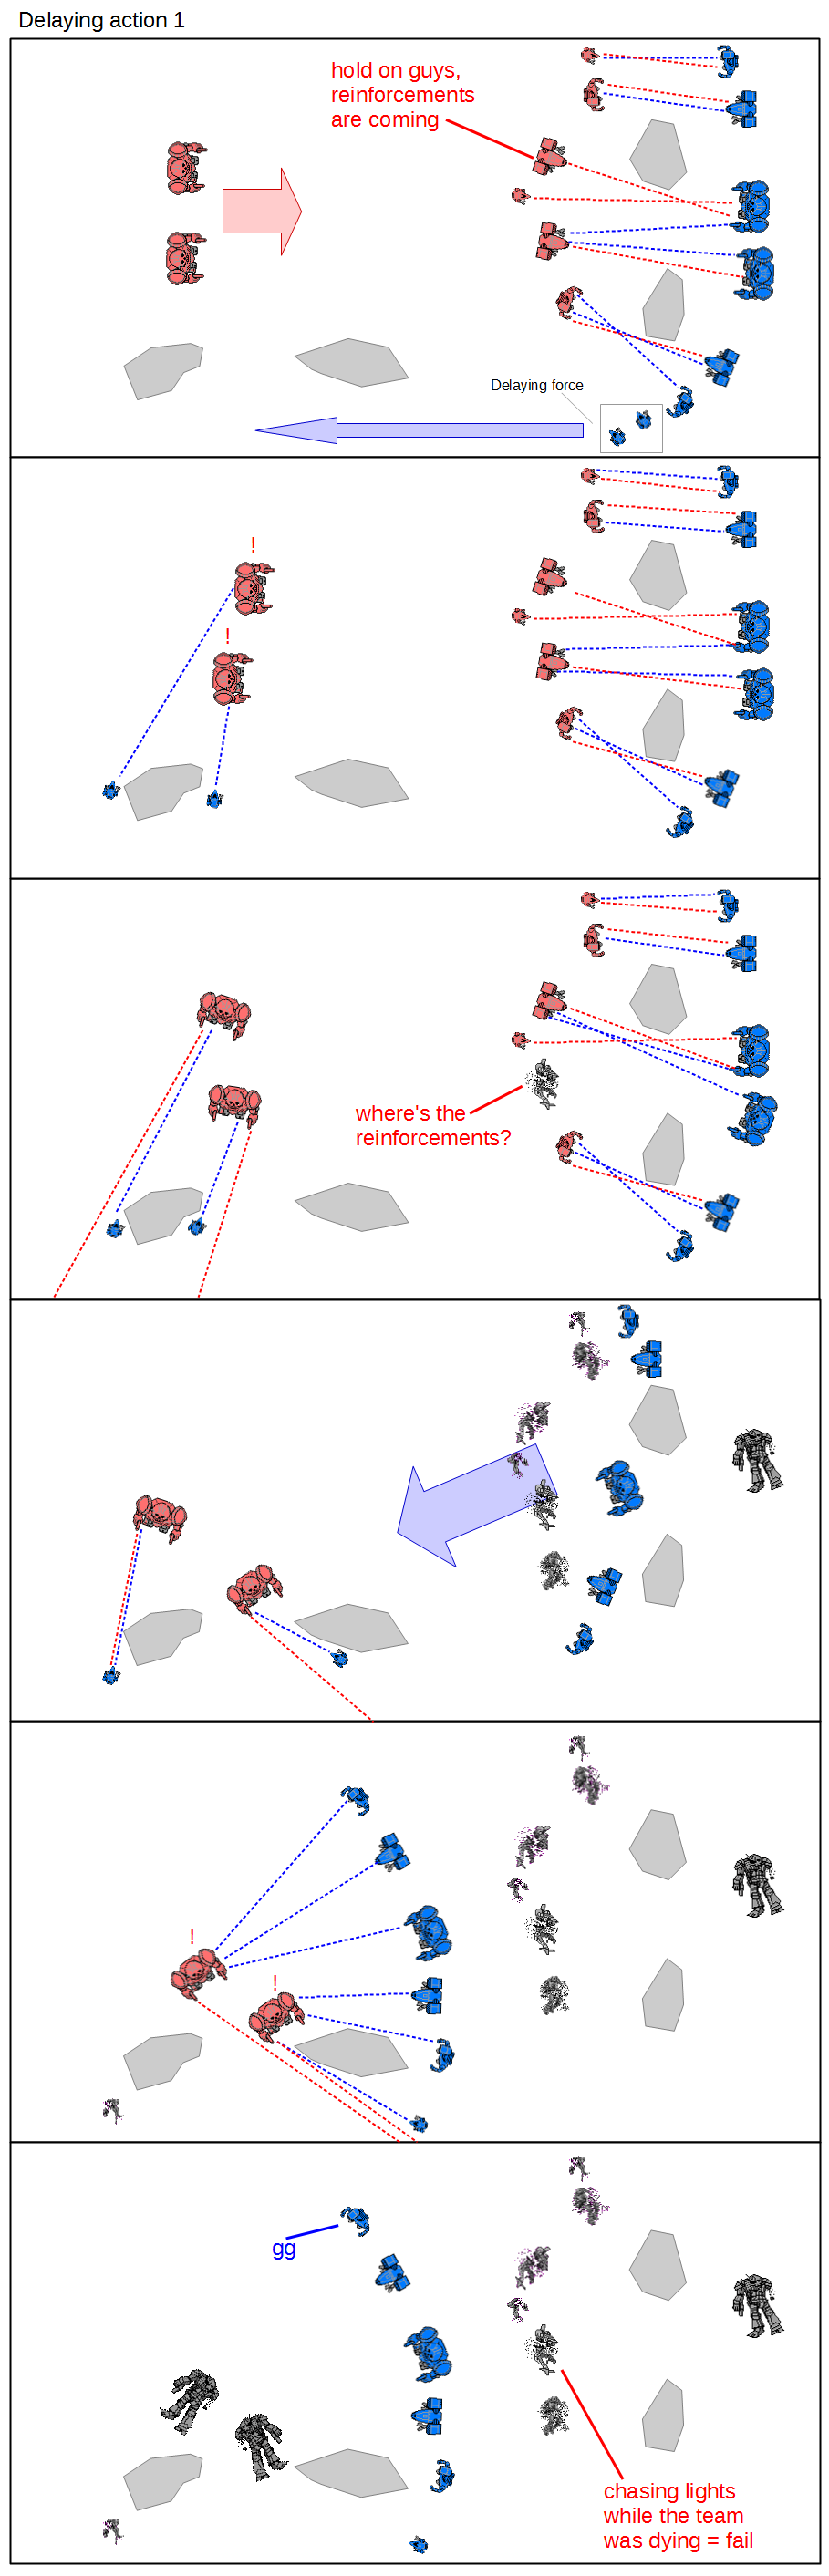 A delaying action is when a weaker force attacks a more powerful force to  slow them down. This can be useful in some situations, and this comic shows  how a